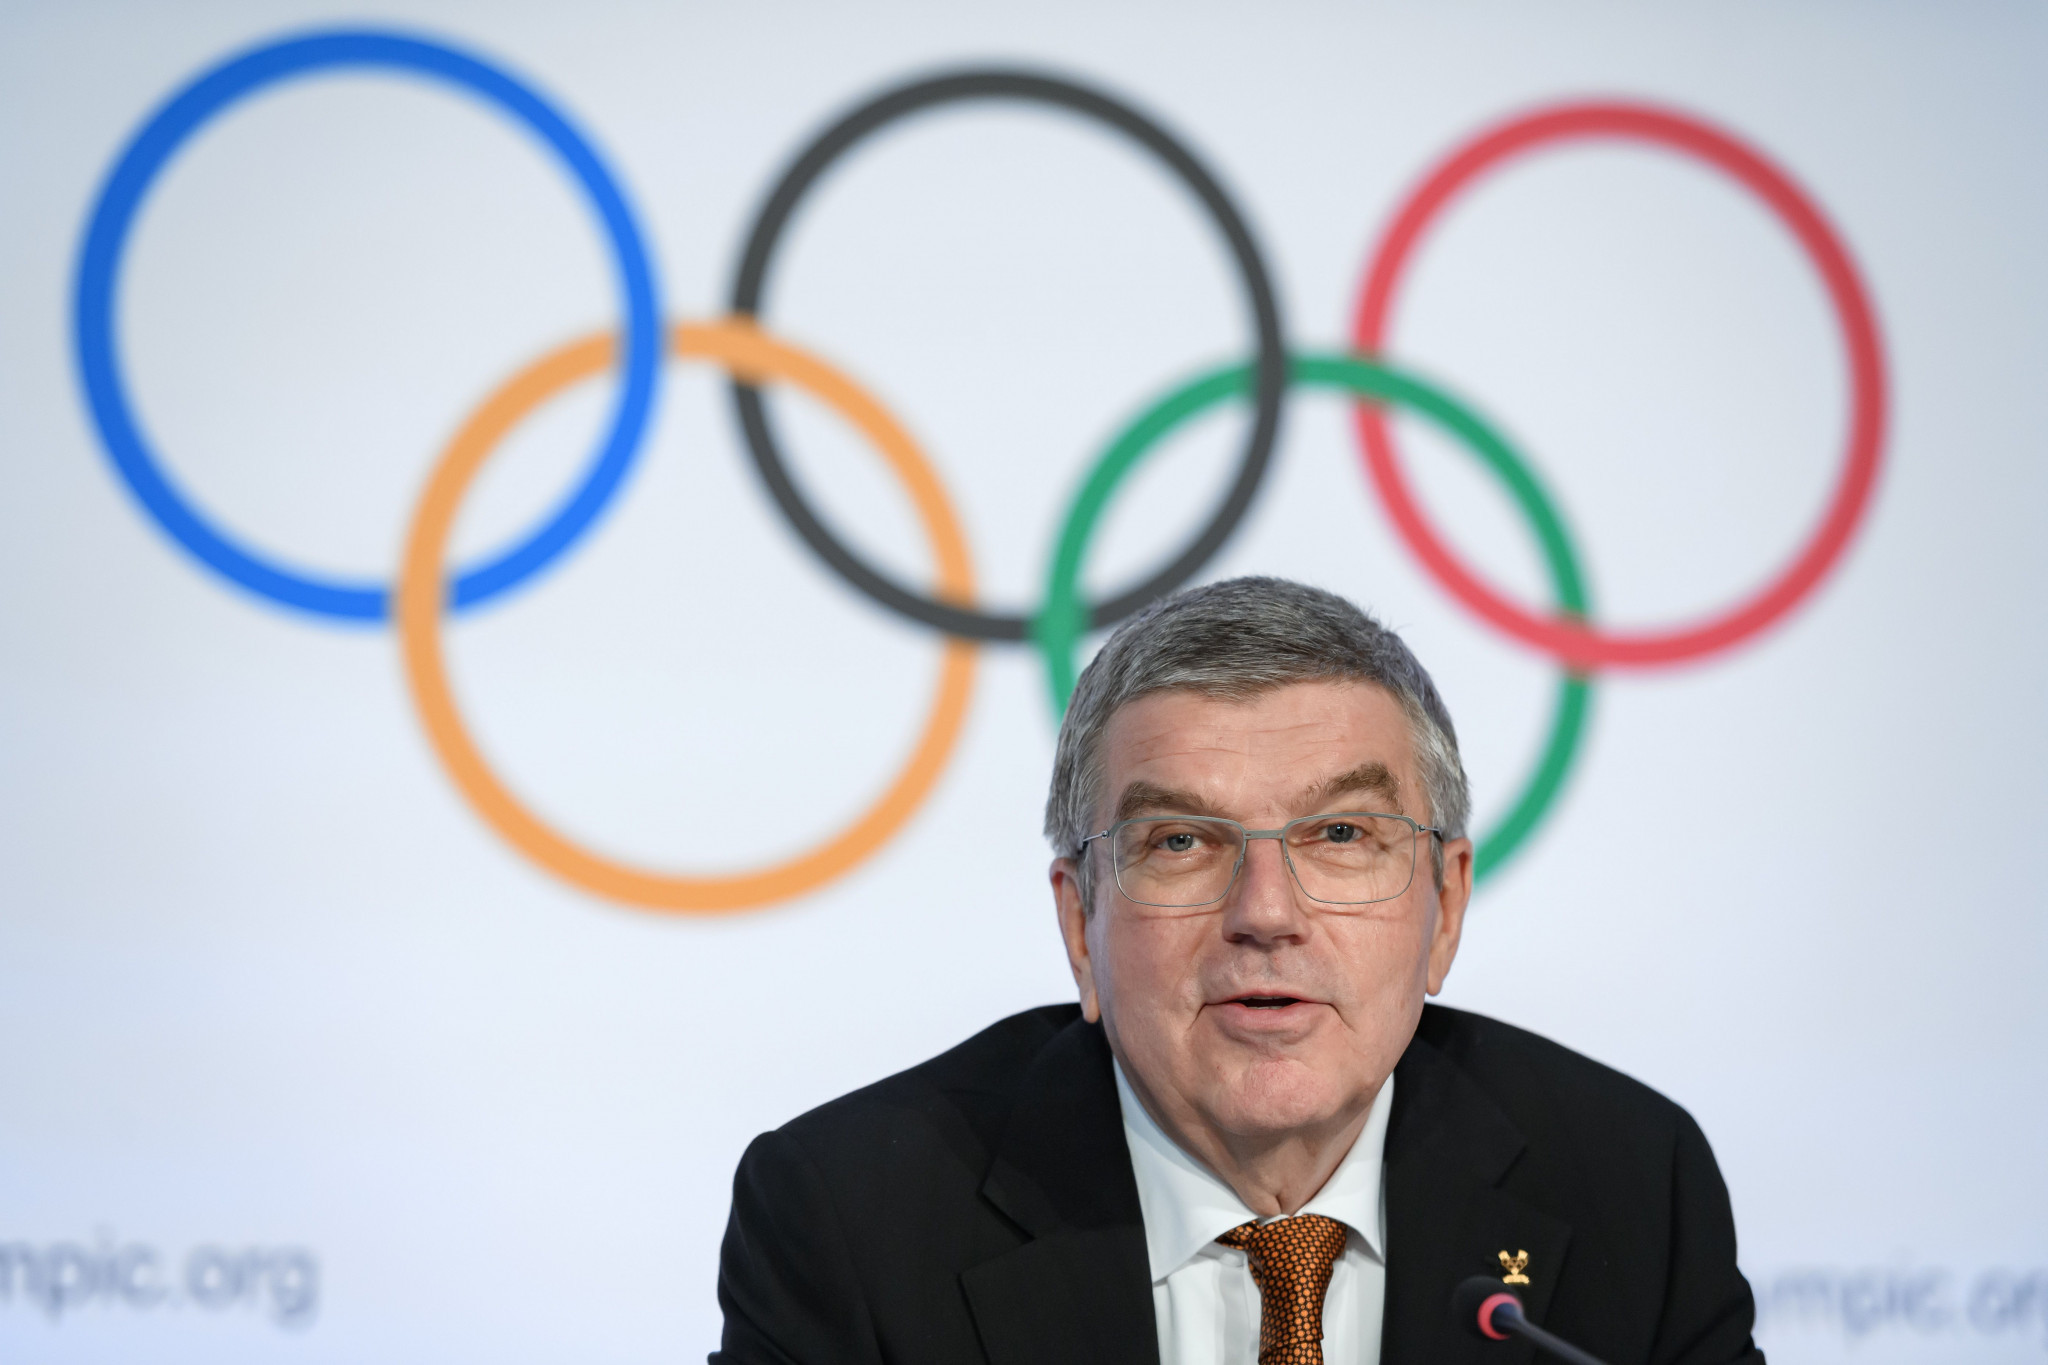 IOC President Thomas Bach has paid tribute to Günther Heinze ©Getty Images